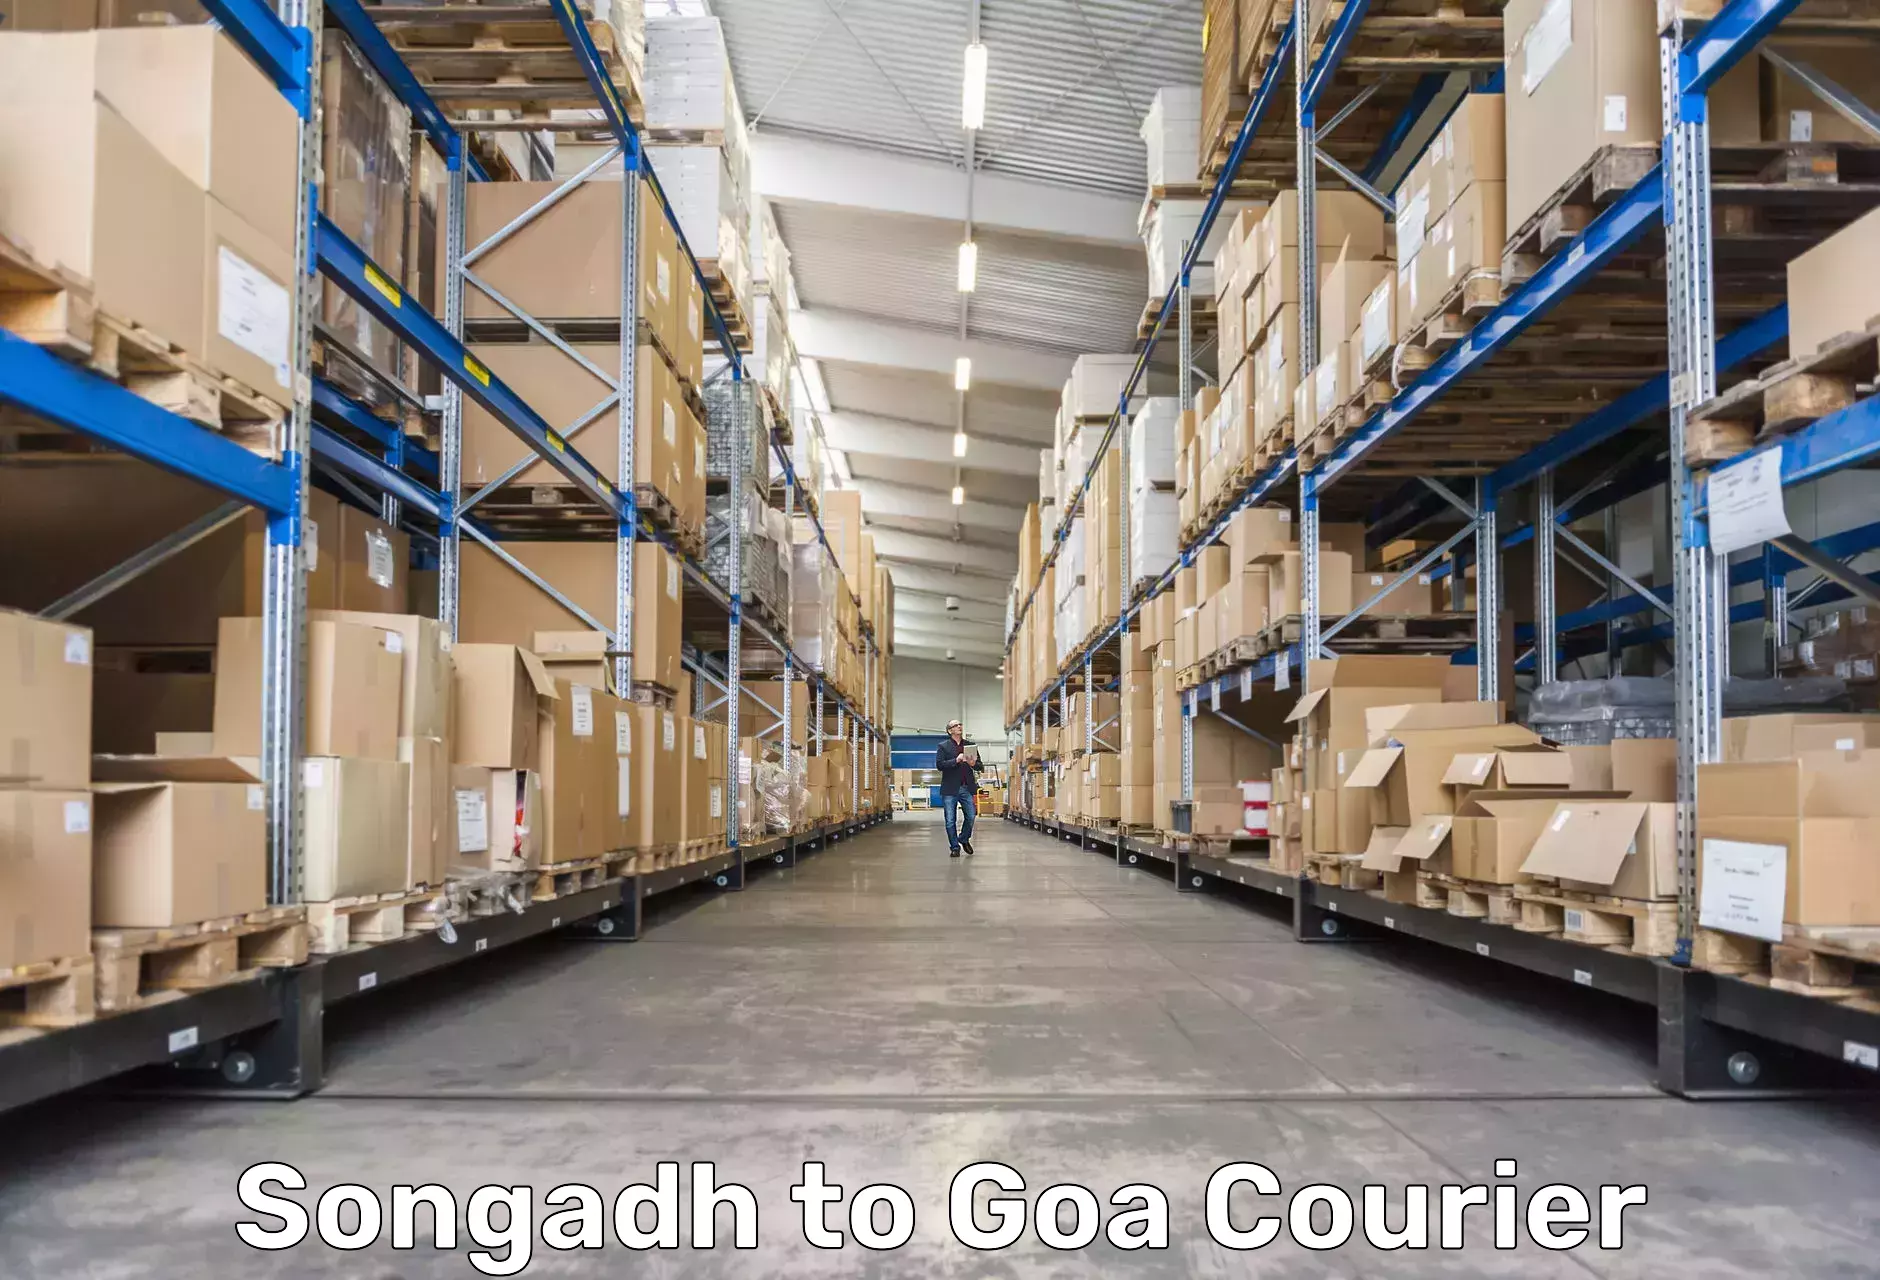 On-call courier service Songadh to Goa